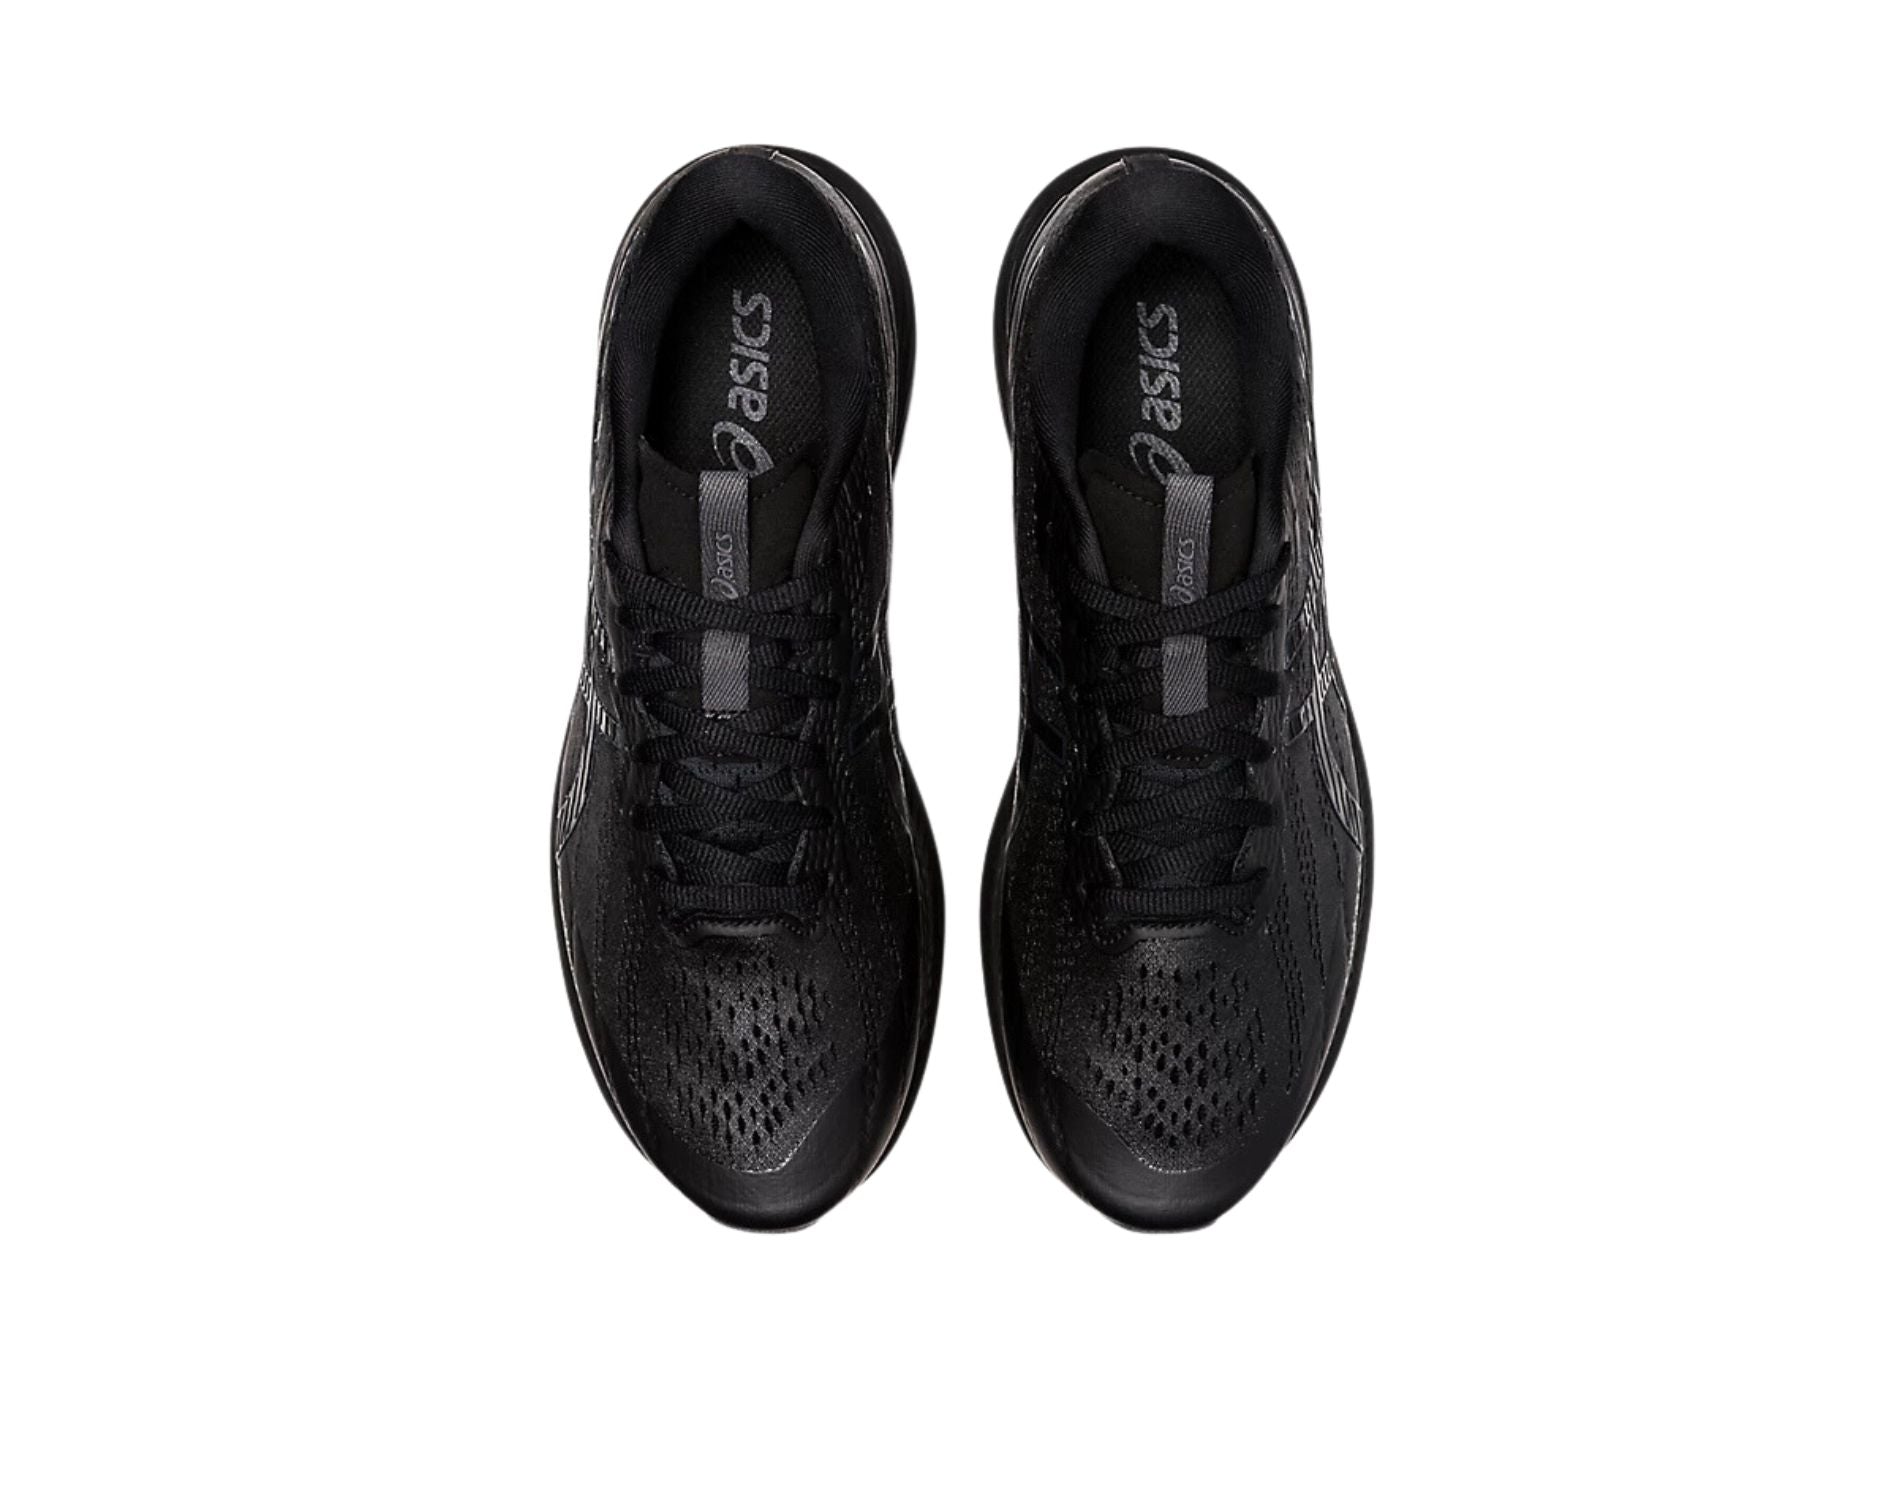 asics walkride ff in black and graphite grey colours facing front